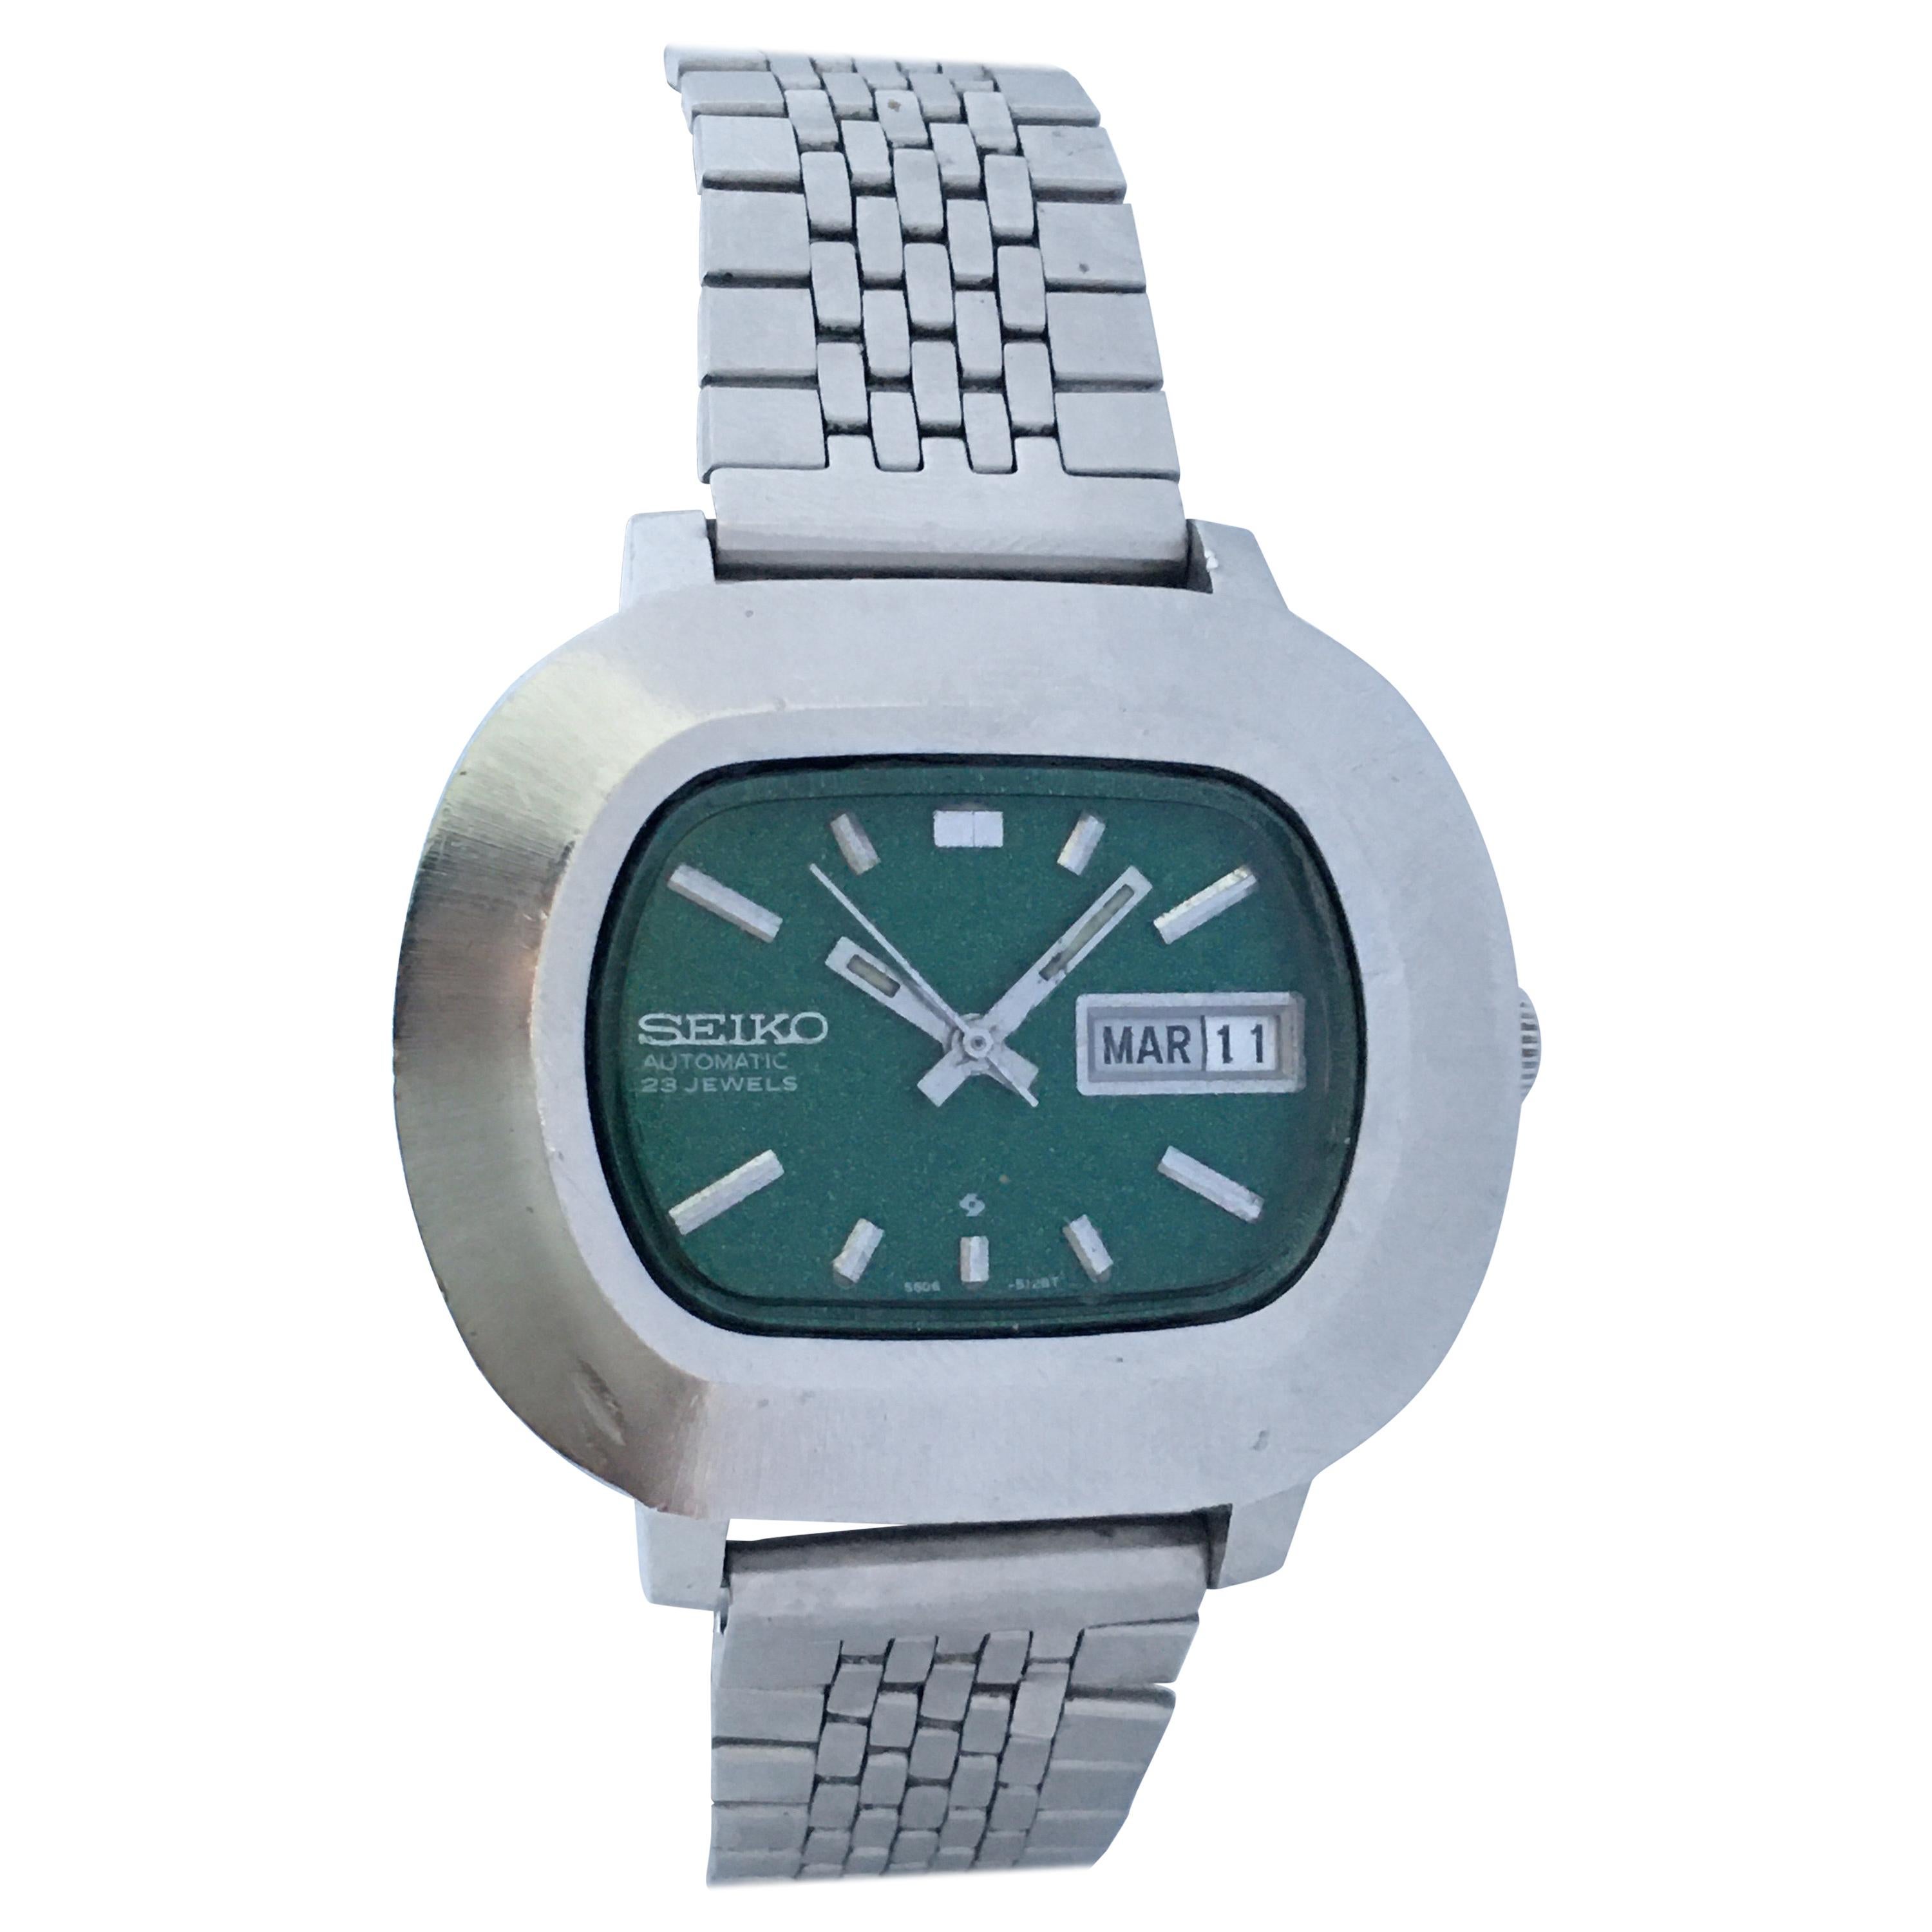 Vintage 1970s Stainless Steel Green Dial Seiko Automatic Watch